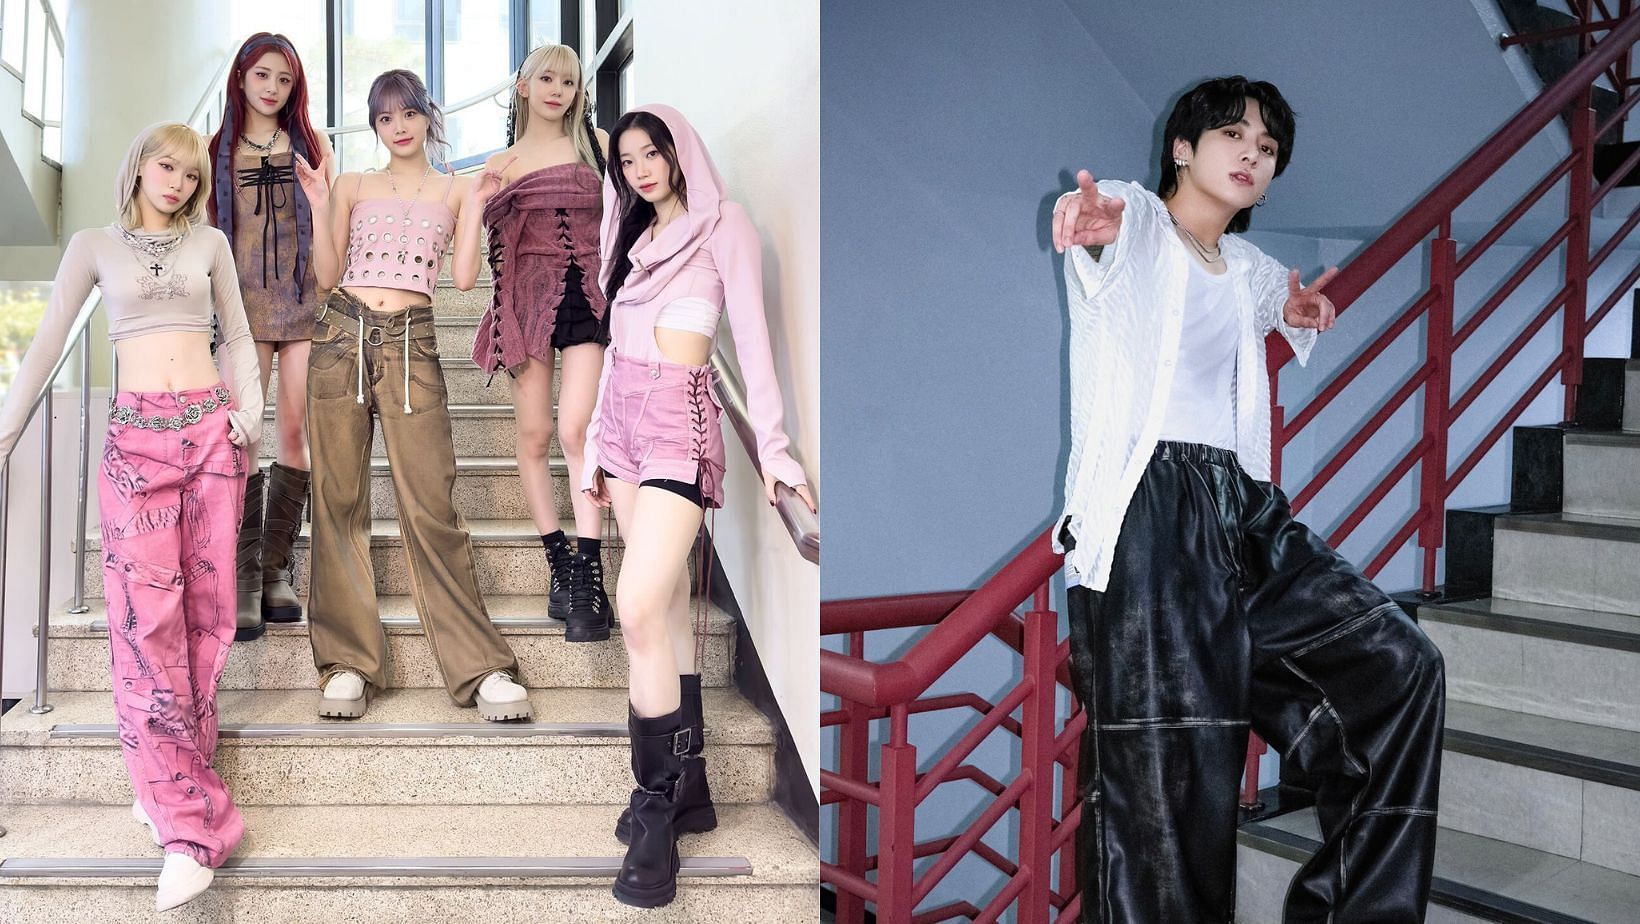 Viral KBS Music Bank TikTok challenge stairs to follow ticketing system following increased demand. (Images via X/@le_sserafim and @bts_bighit)